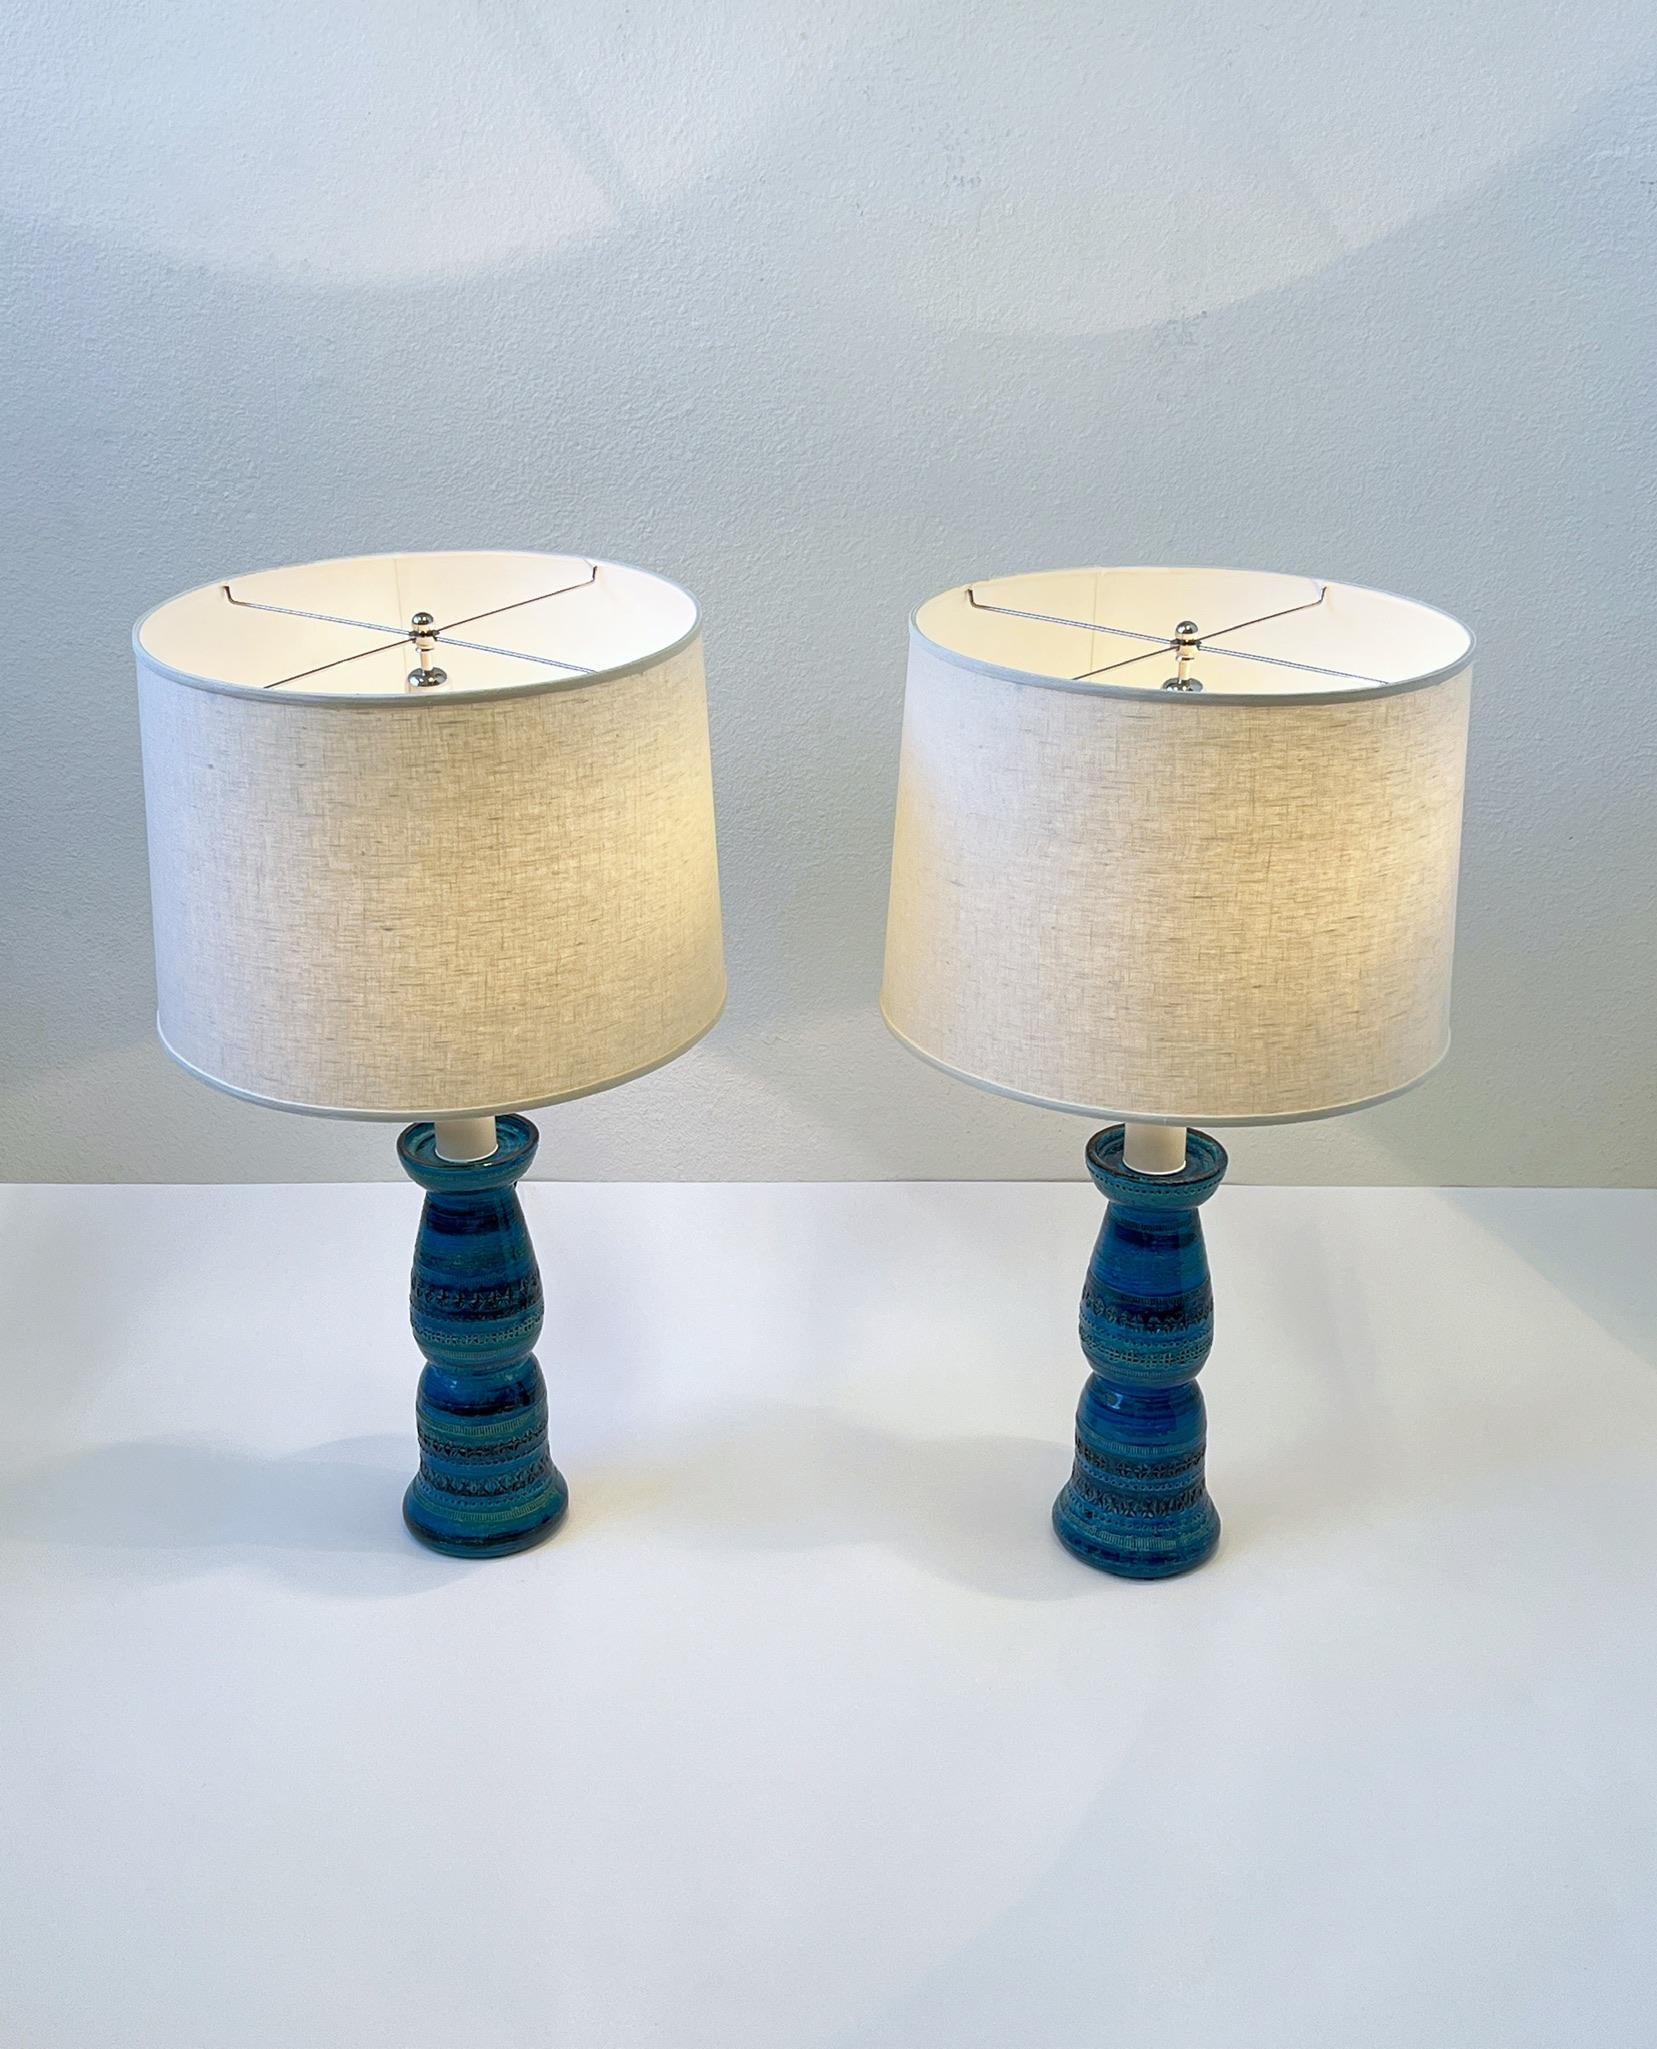 Polished Pair of Italian Ceramic and Nickel Table Lamps by Aldo Londi for Bitossi